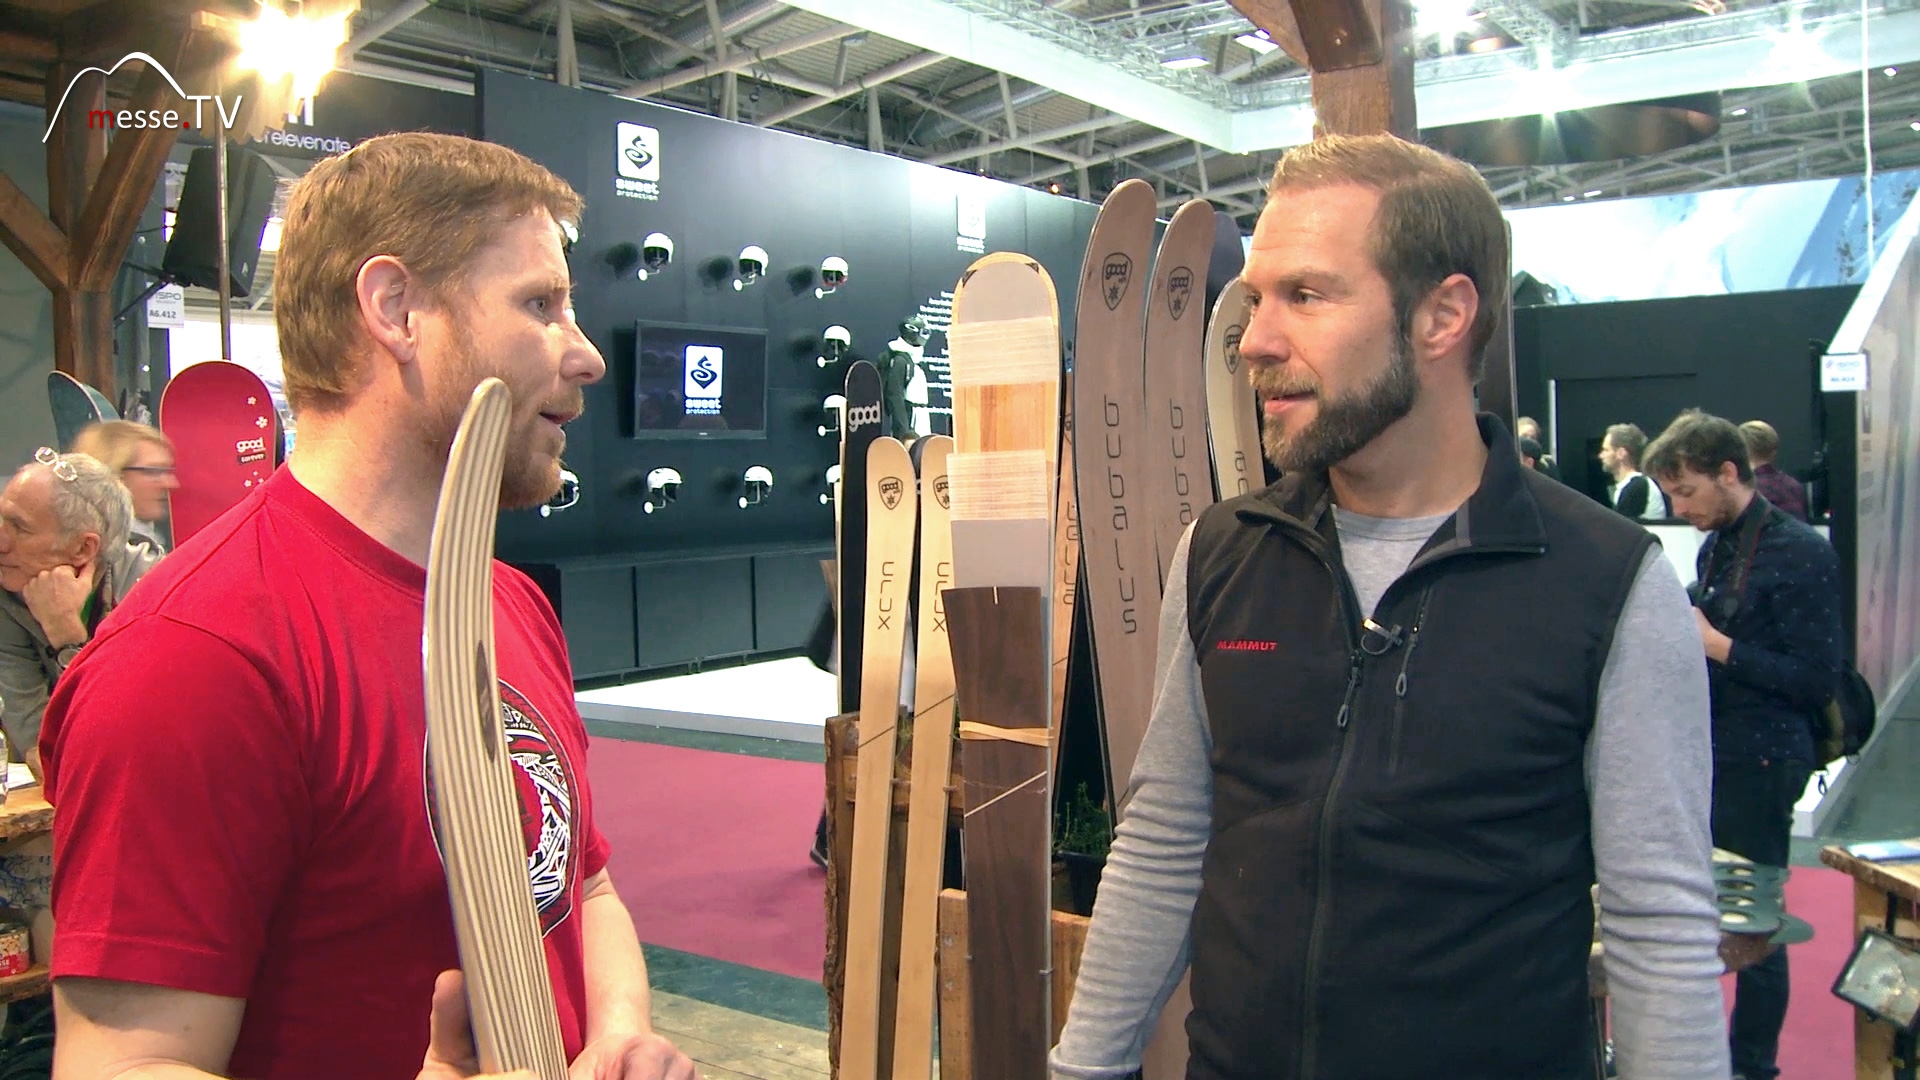 MesseTV Interview Good Boards Ispo Muenchen